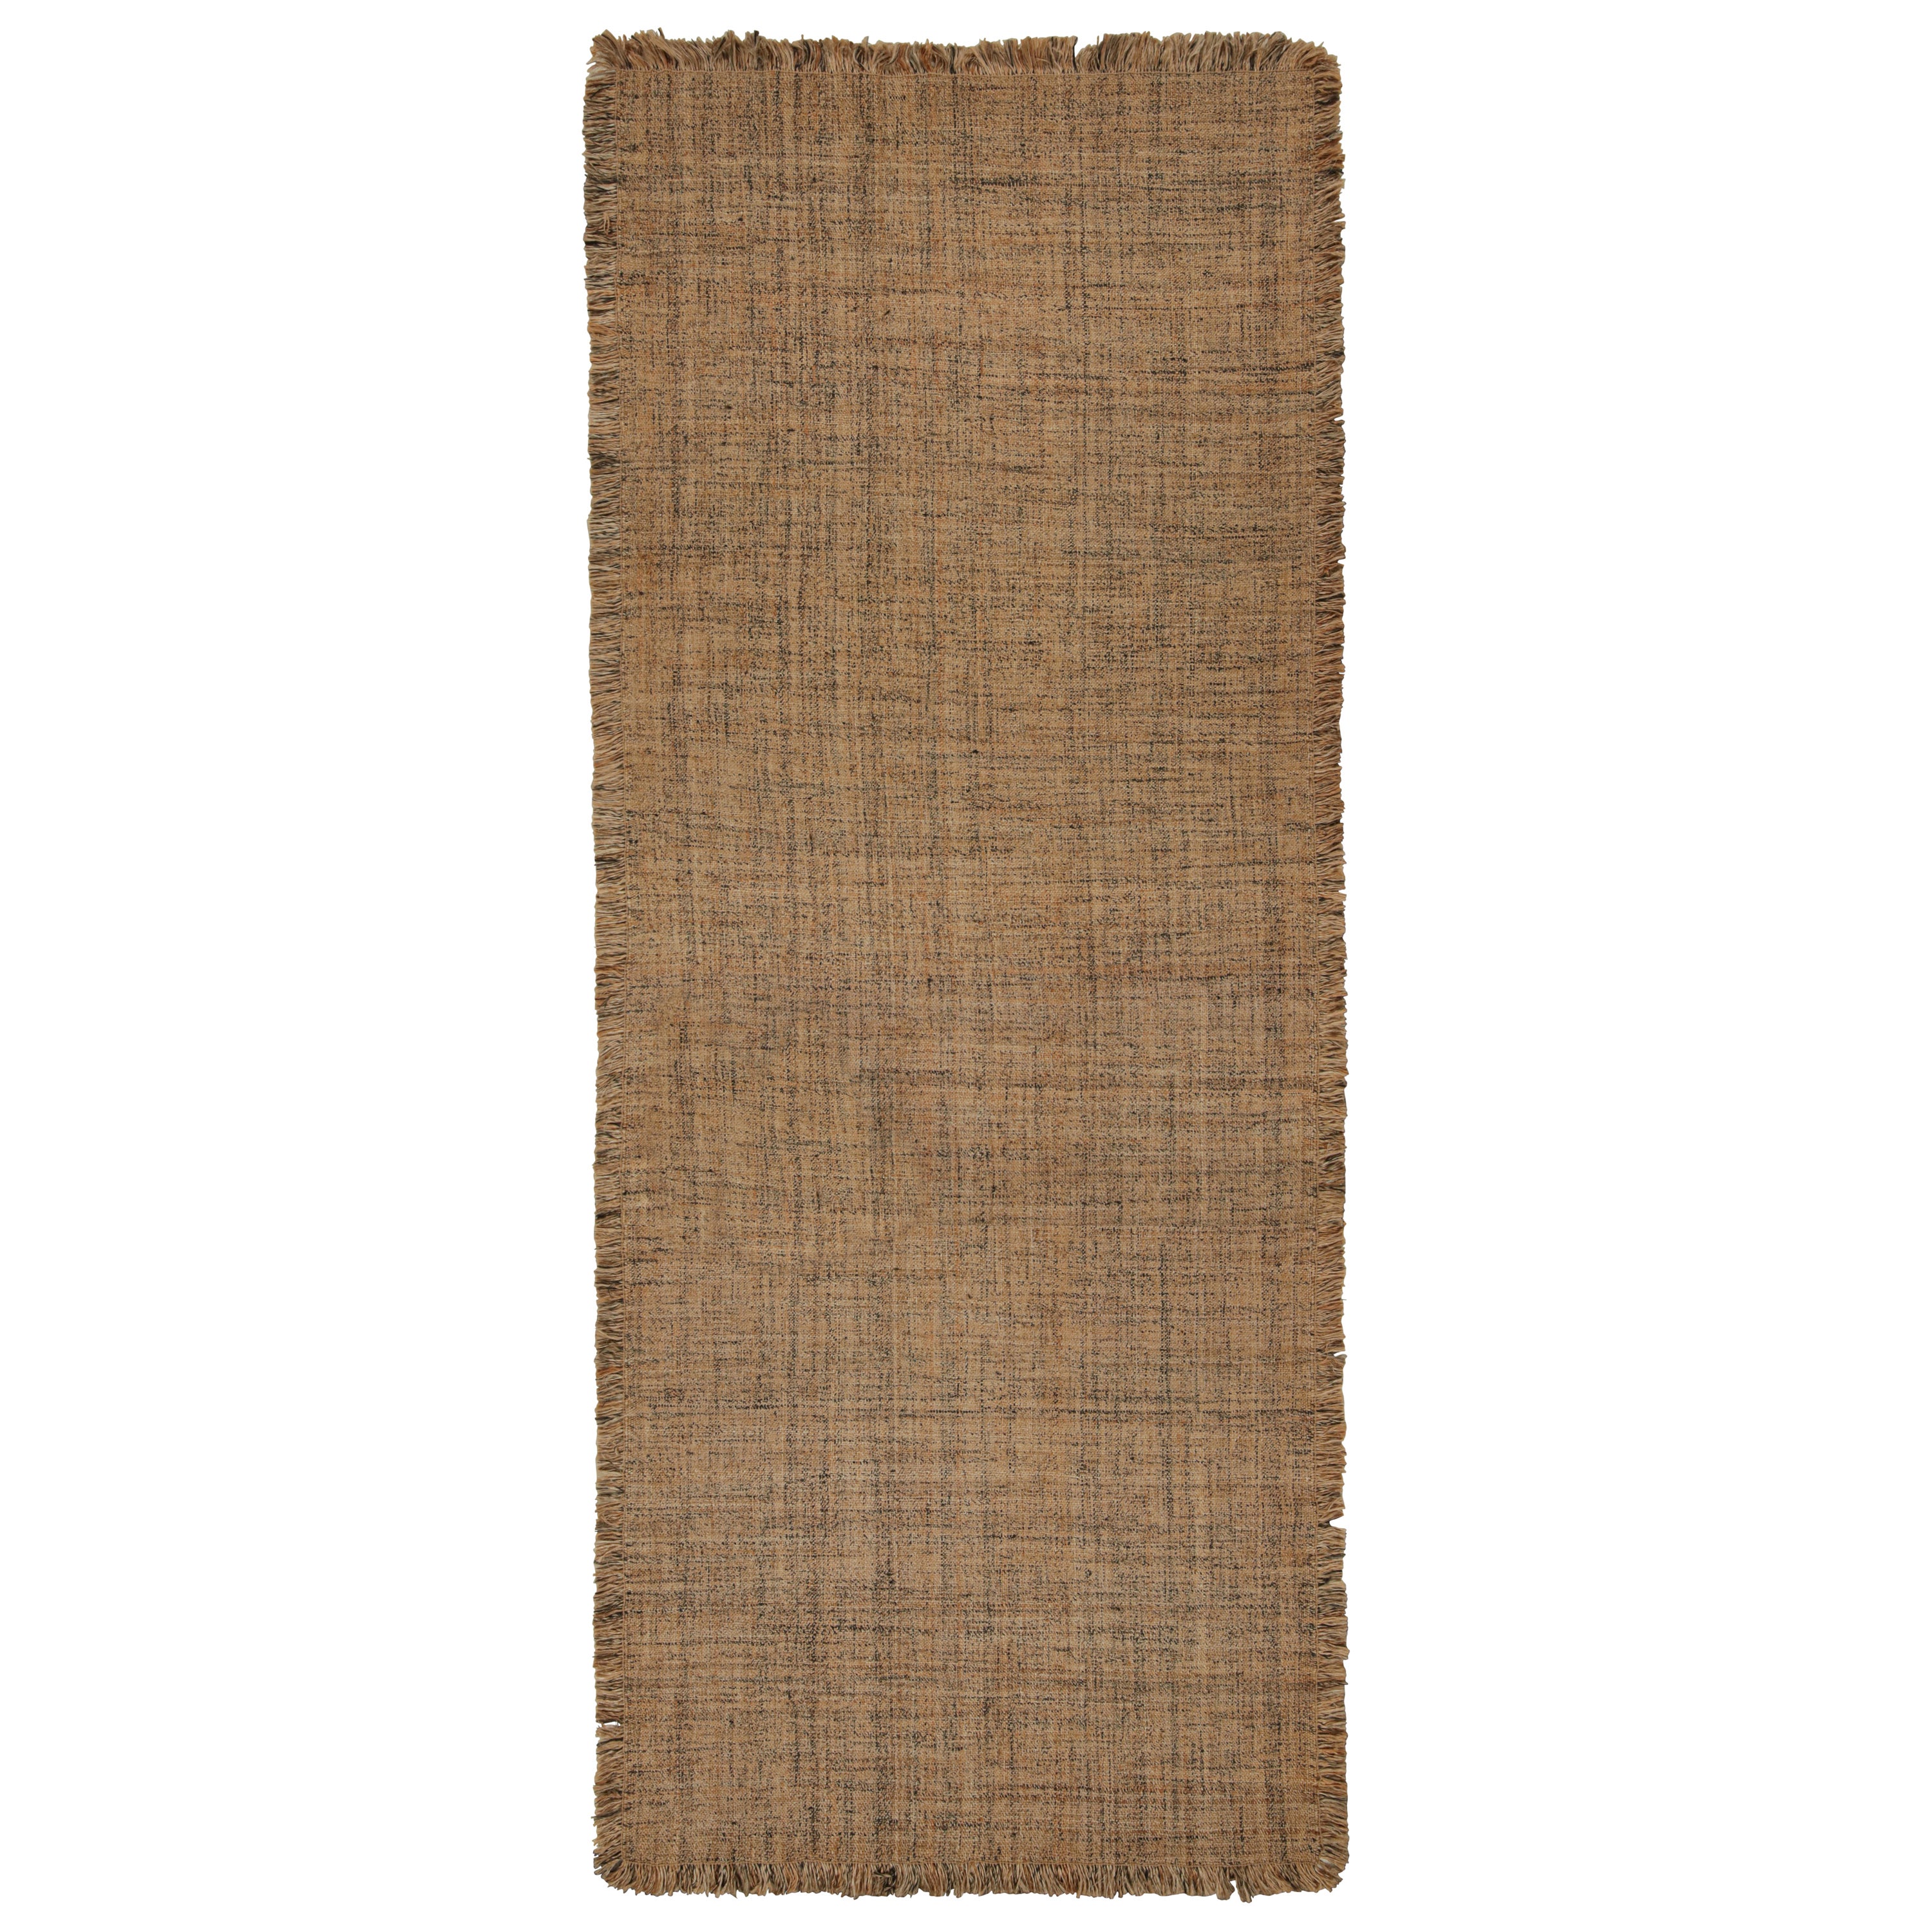 Rug & Kilim’s Contemporary Rug in Beige-Brown Striae and Gold and Black Accents For Sale